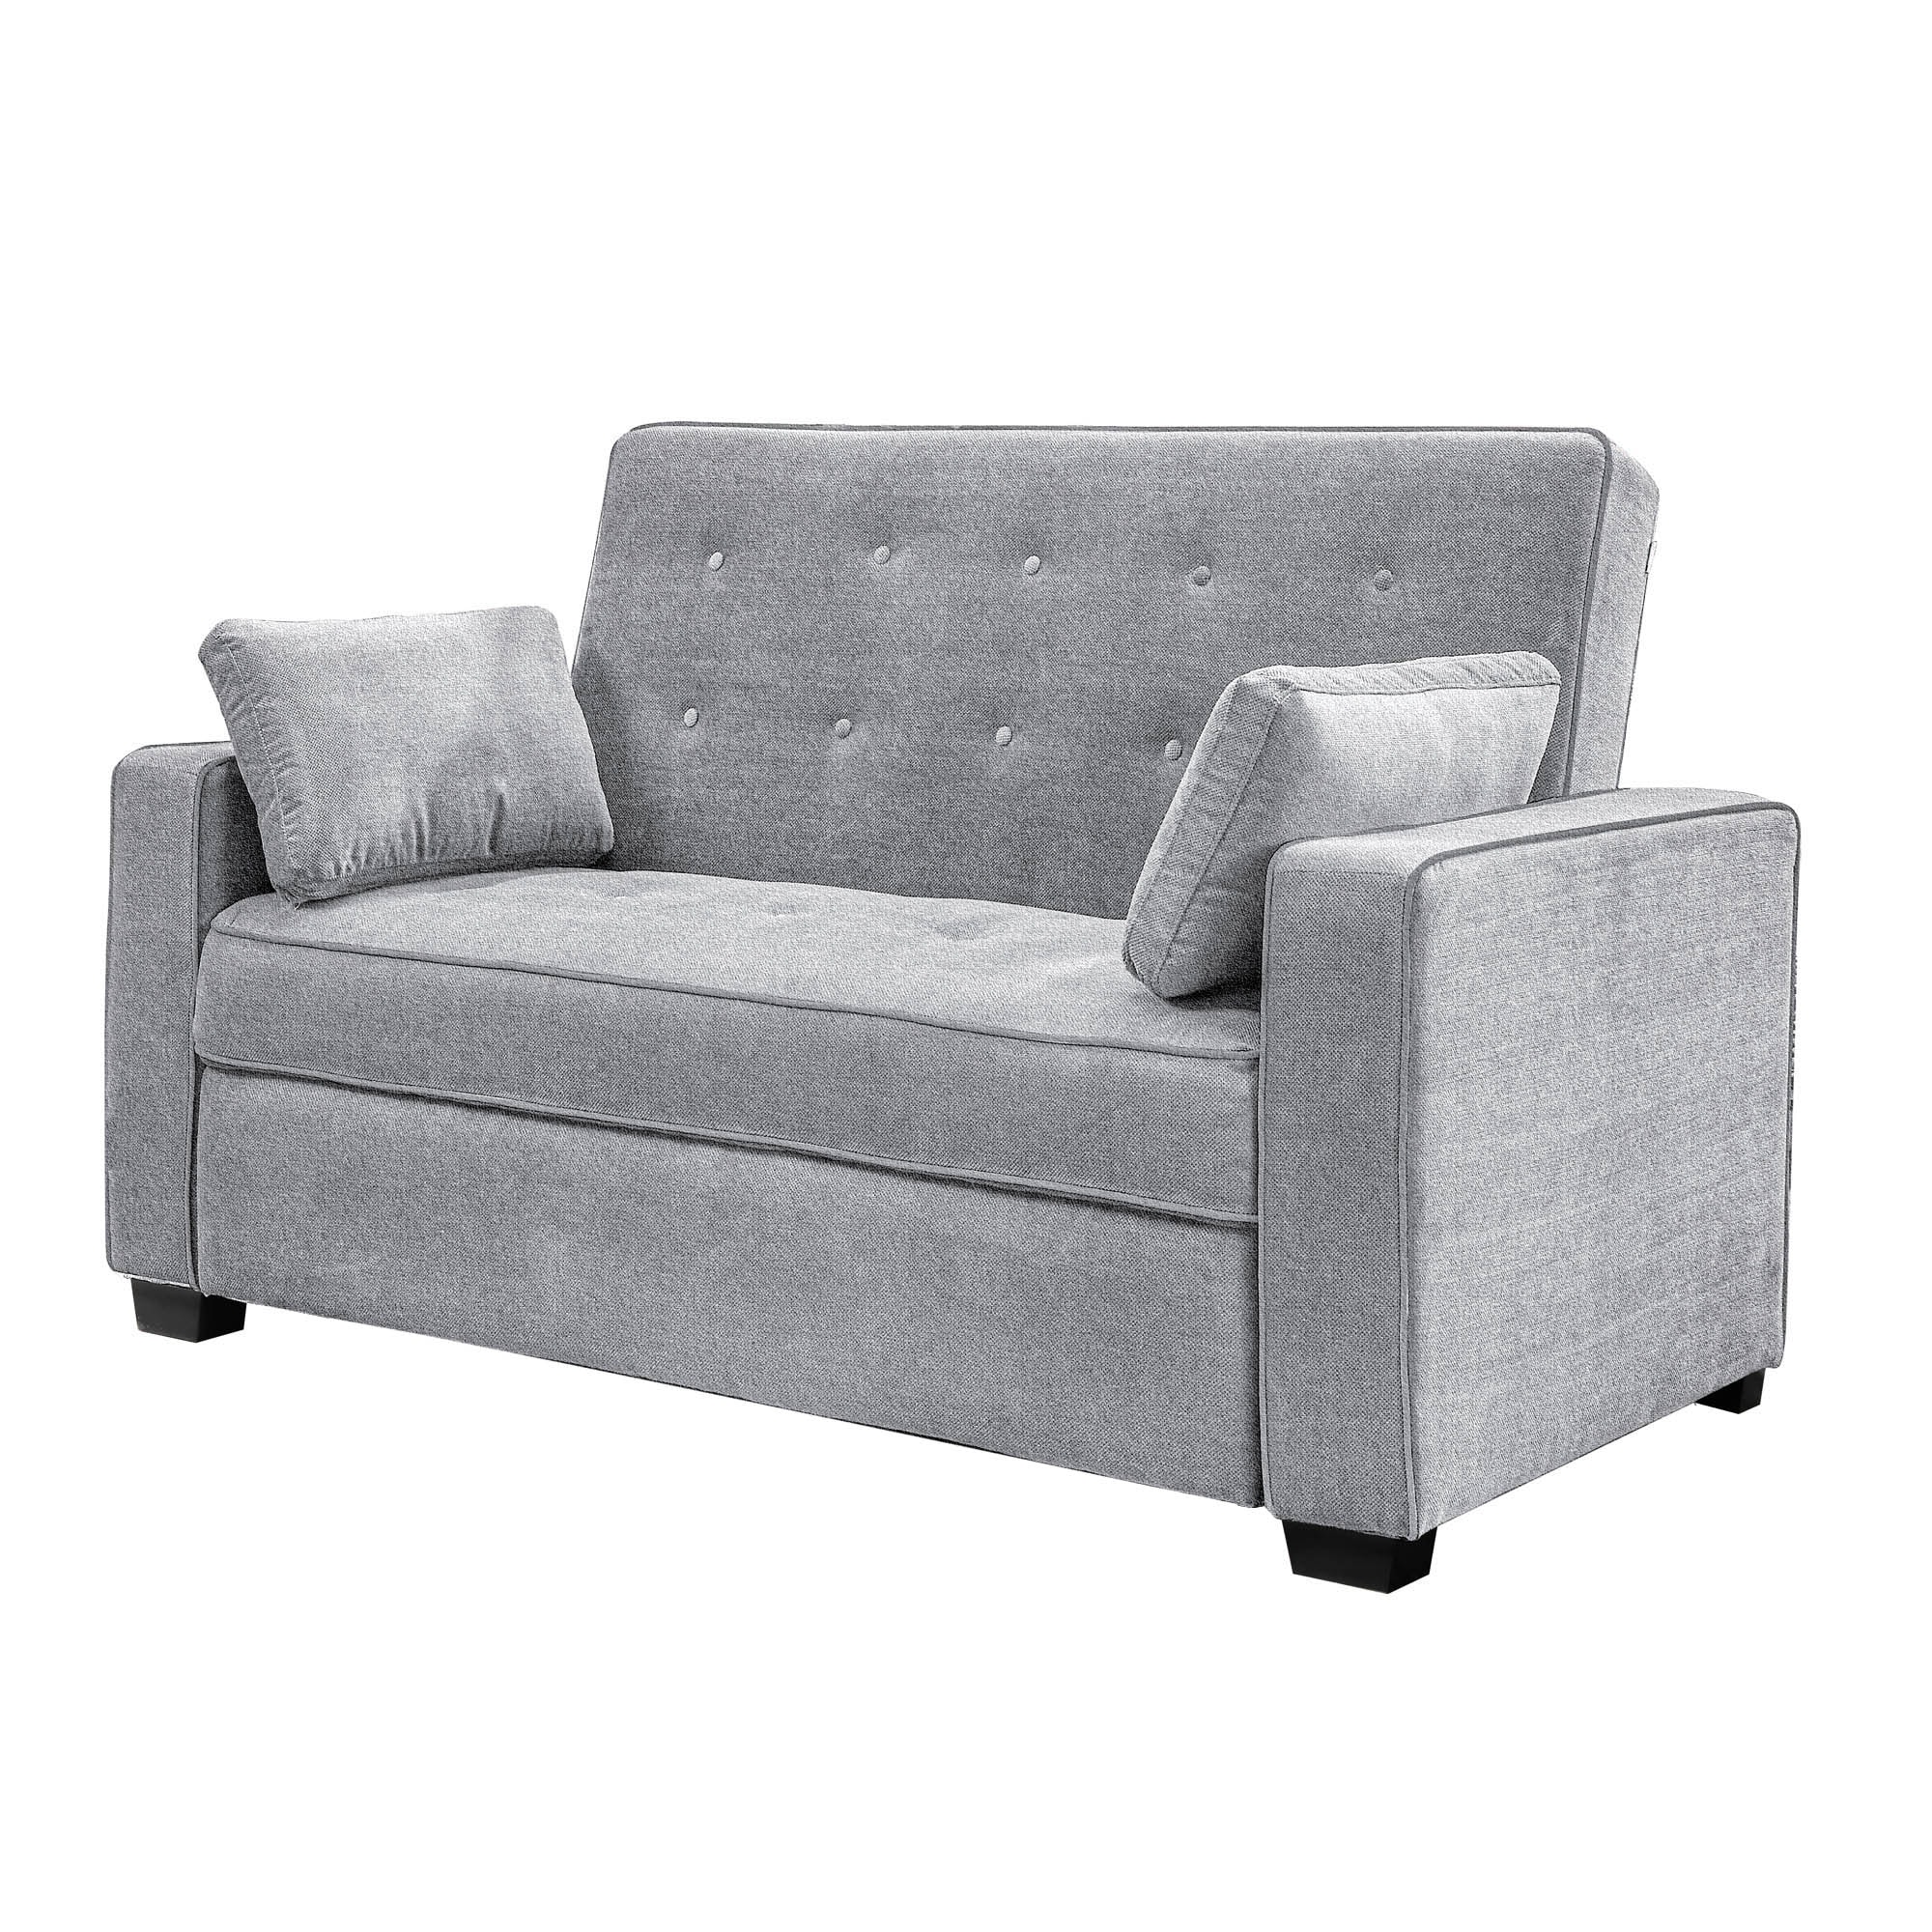 Sofas 66.5-in Sofa 2-seater Arya Modern Polyester/Blend the & in Couches, at Light Loveseats Serta Grey department